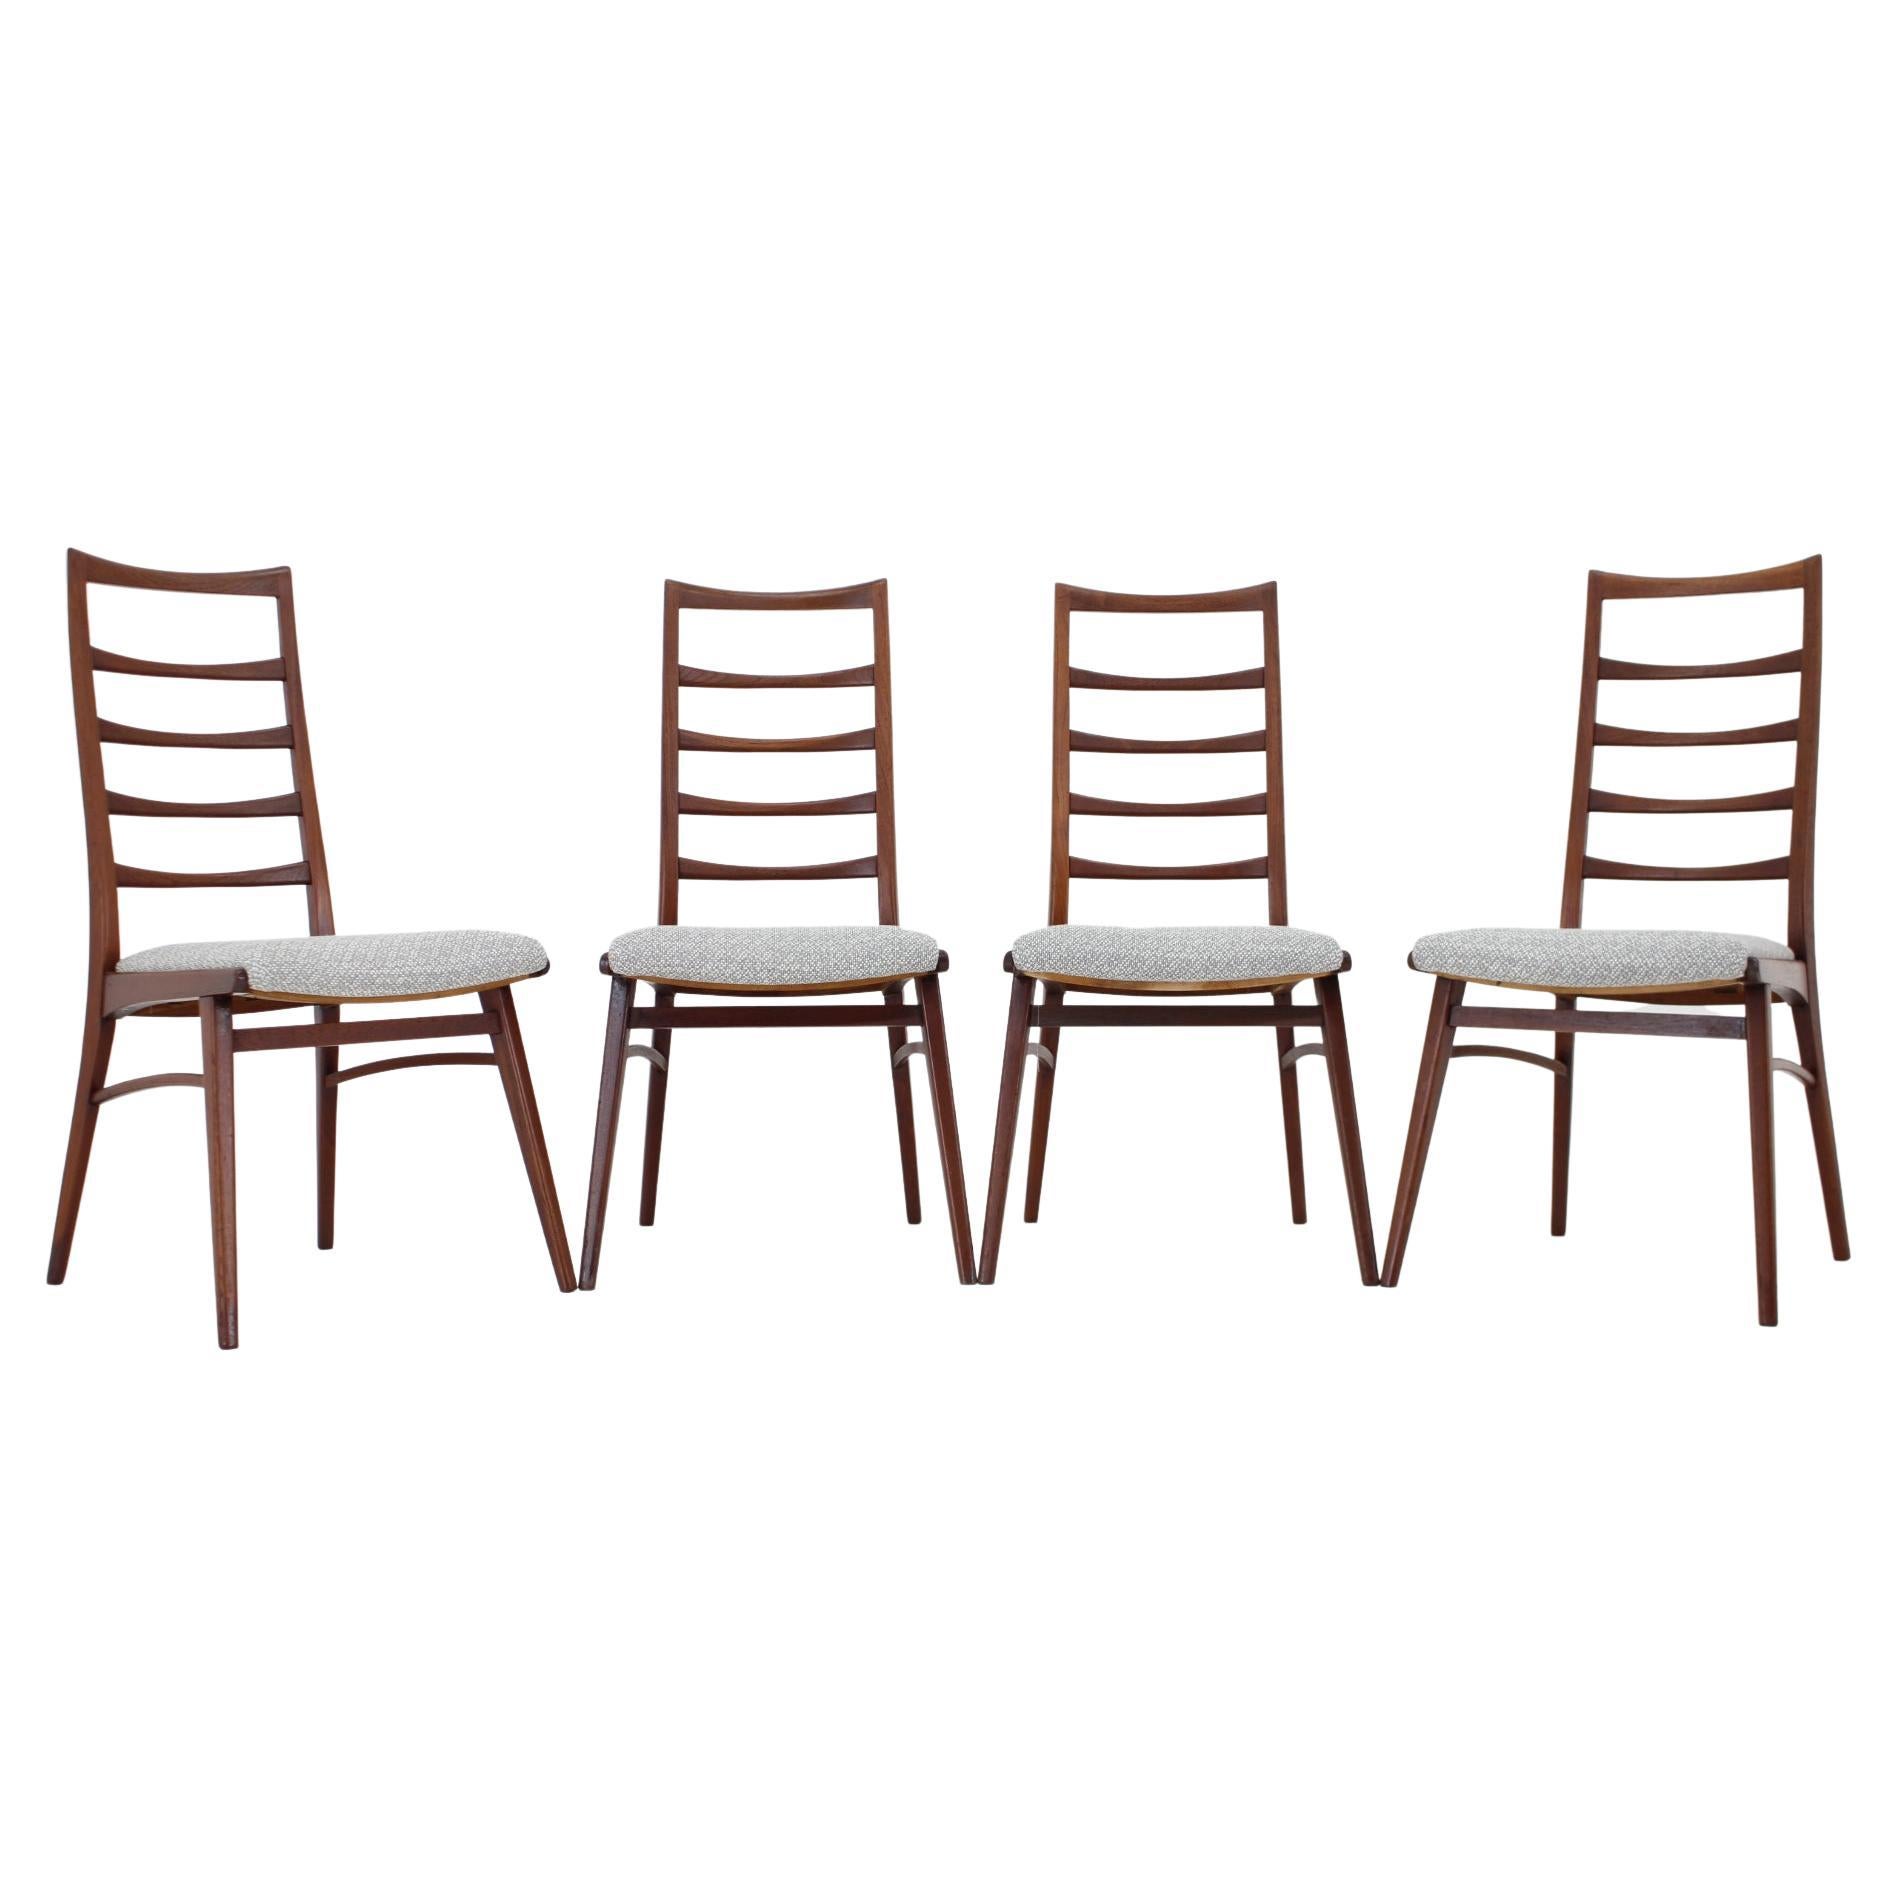 1960s Set of Four Dining Chairs in Teak, Germany For Sale